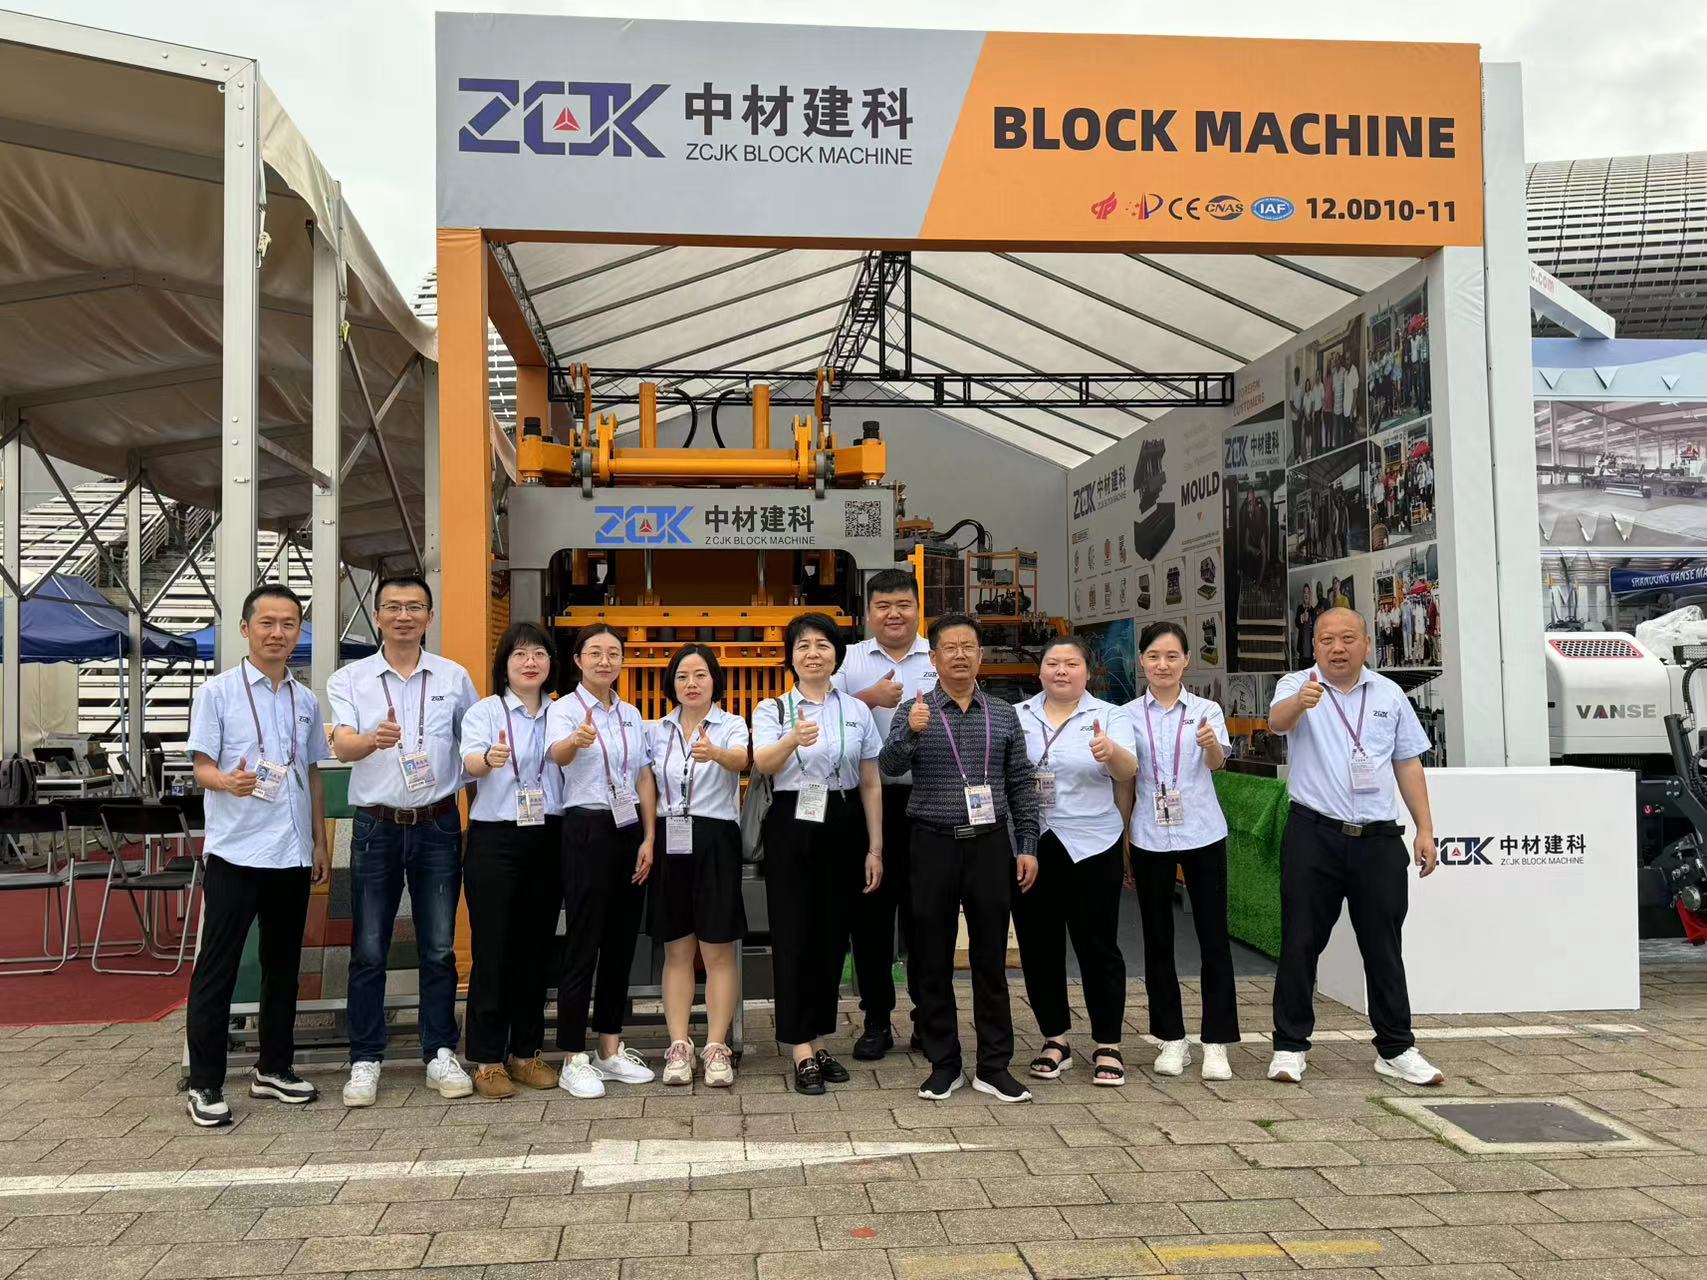 ZCJK-The first phase of the 135th Canton Fair concluded successfully